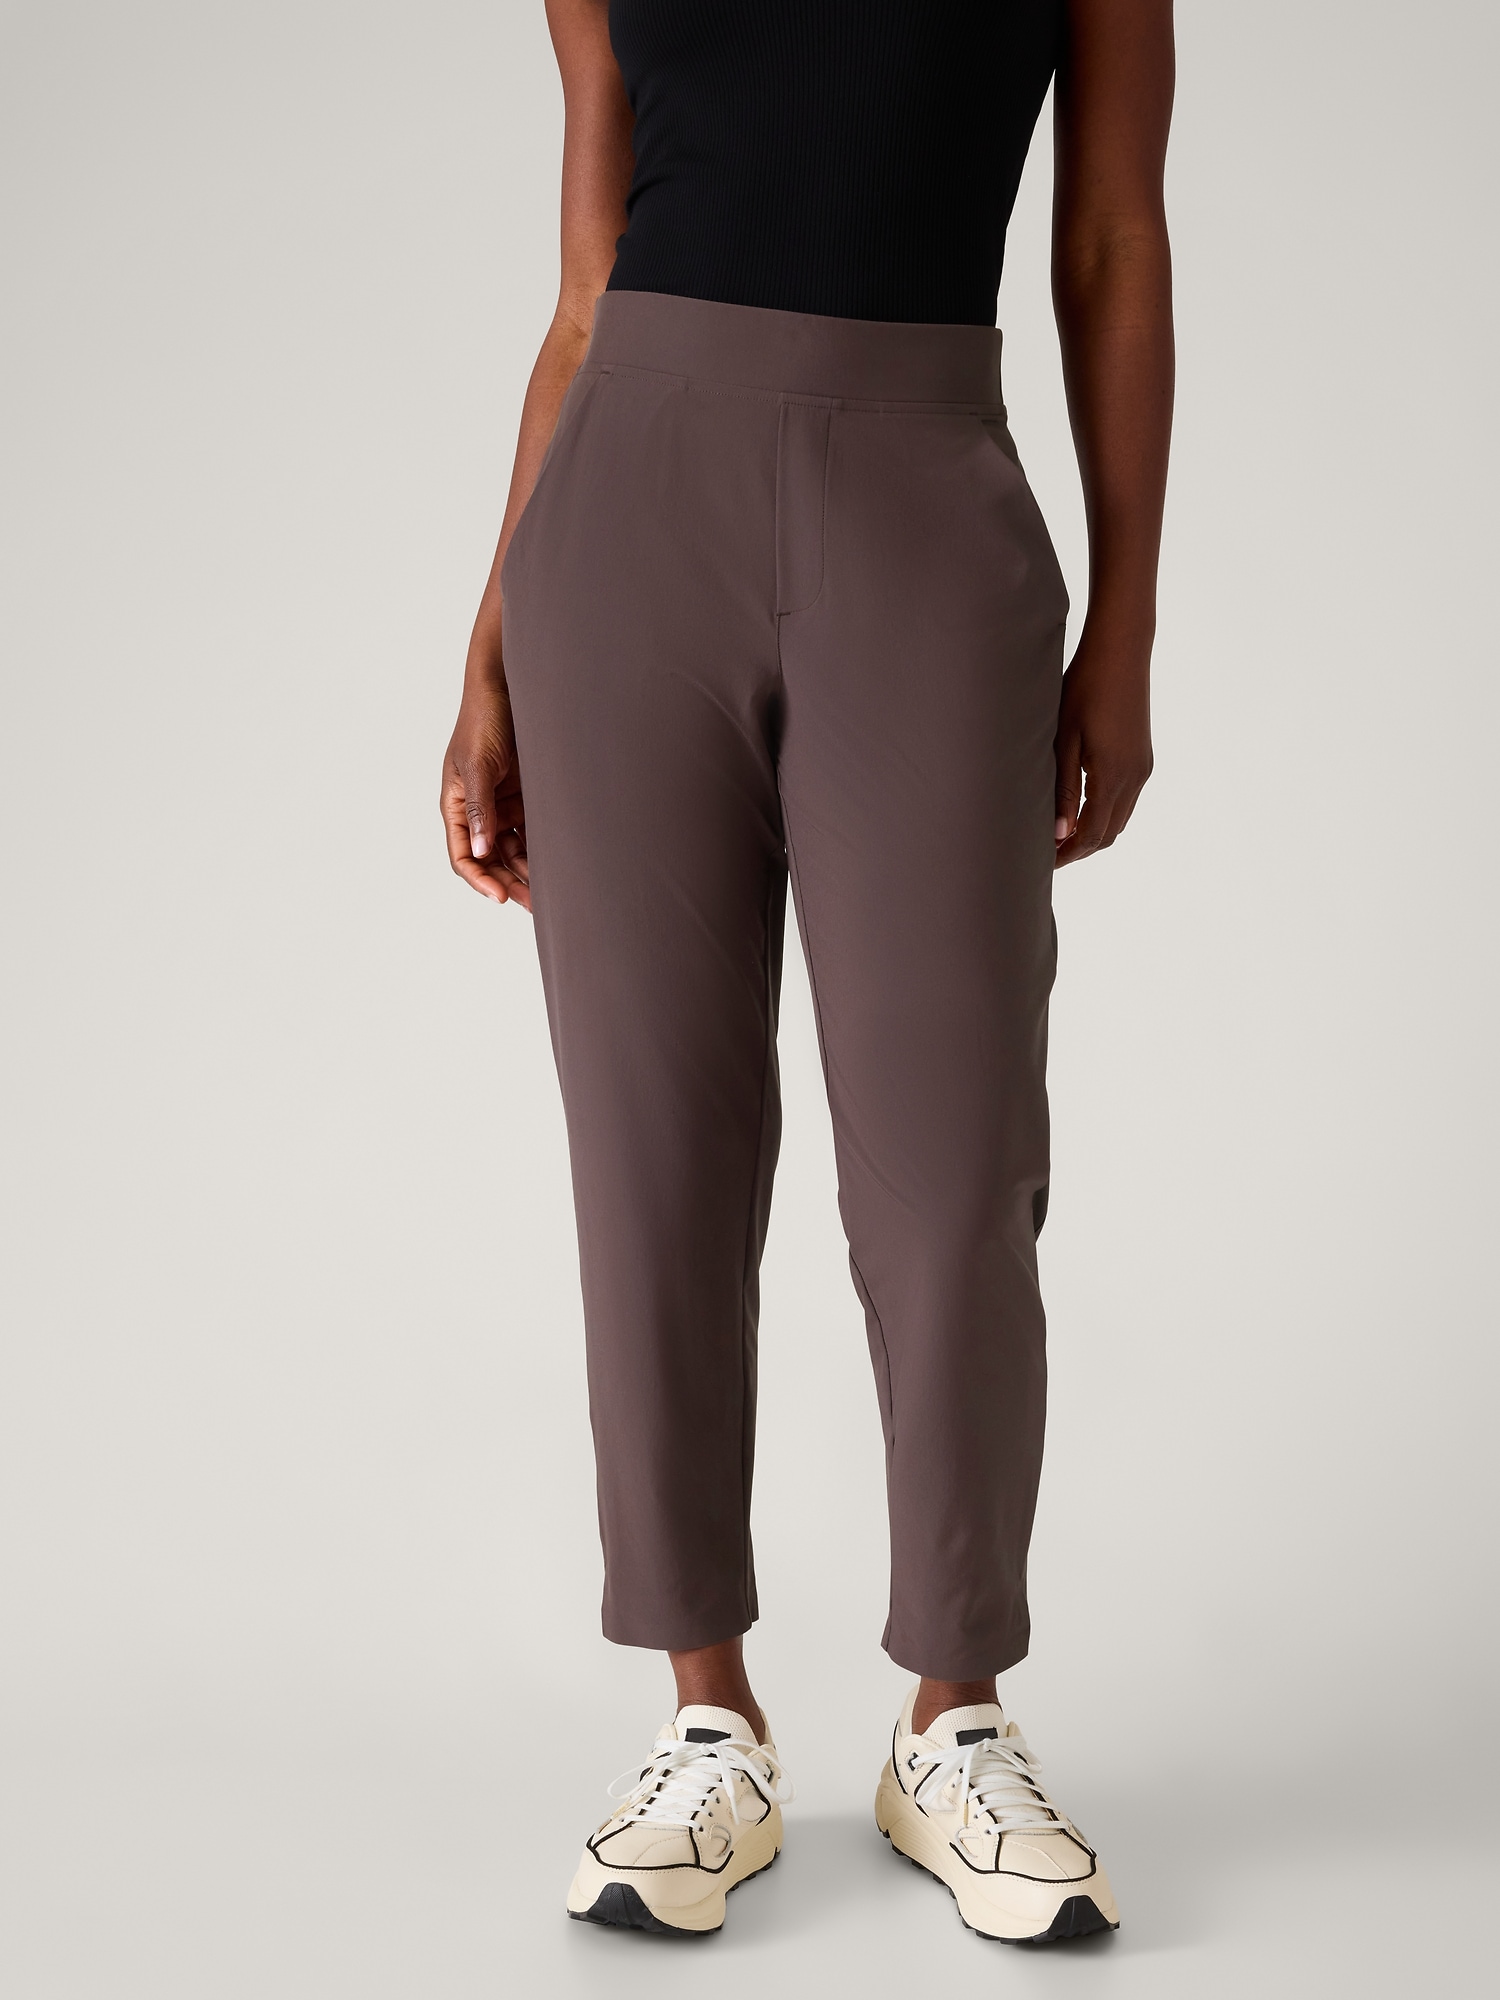 Athleta Brooklyn Mid Rise Ankle Pant In Shale